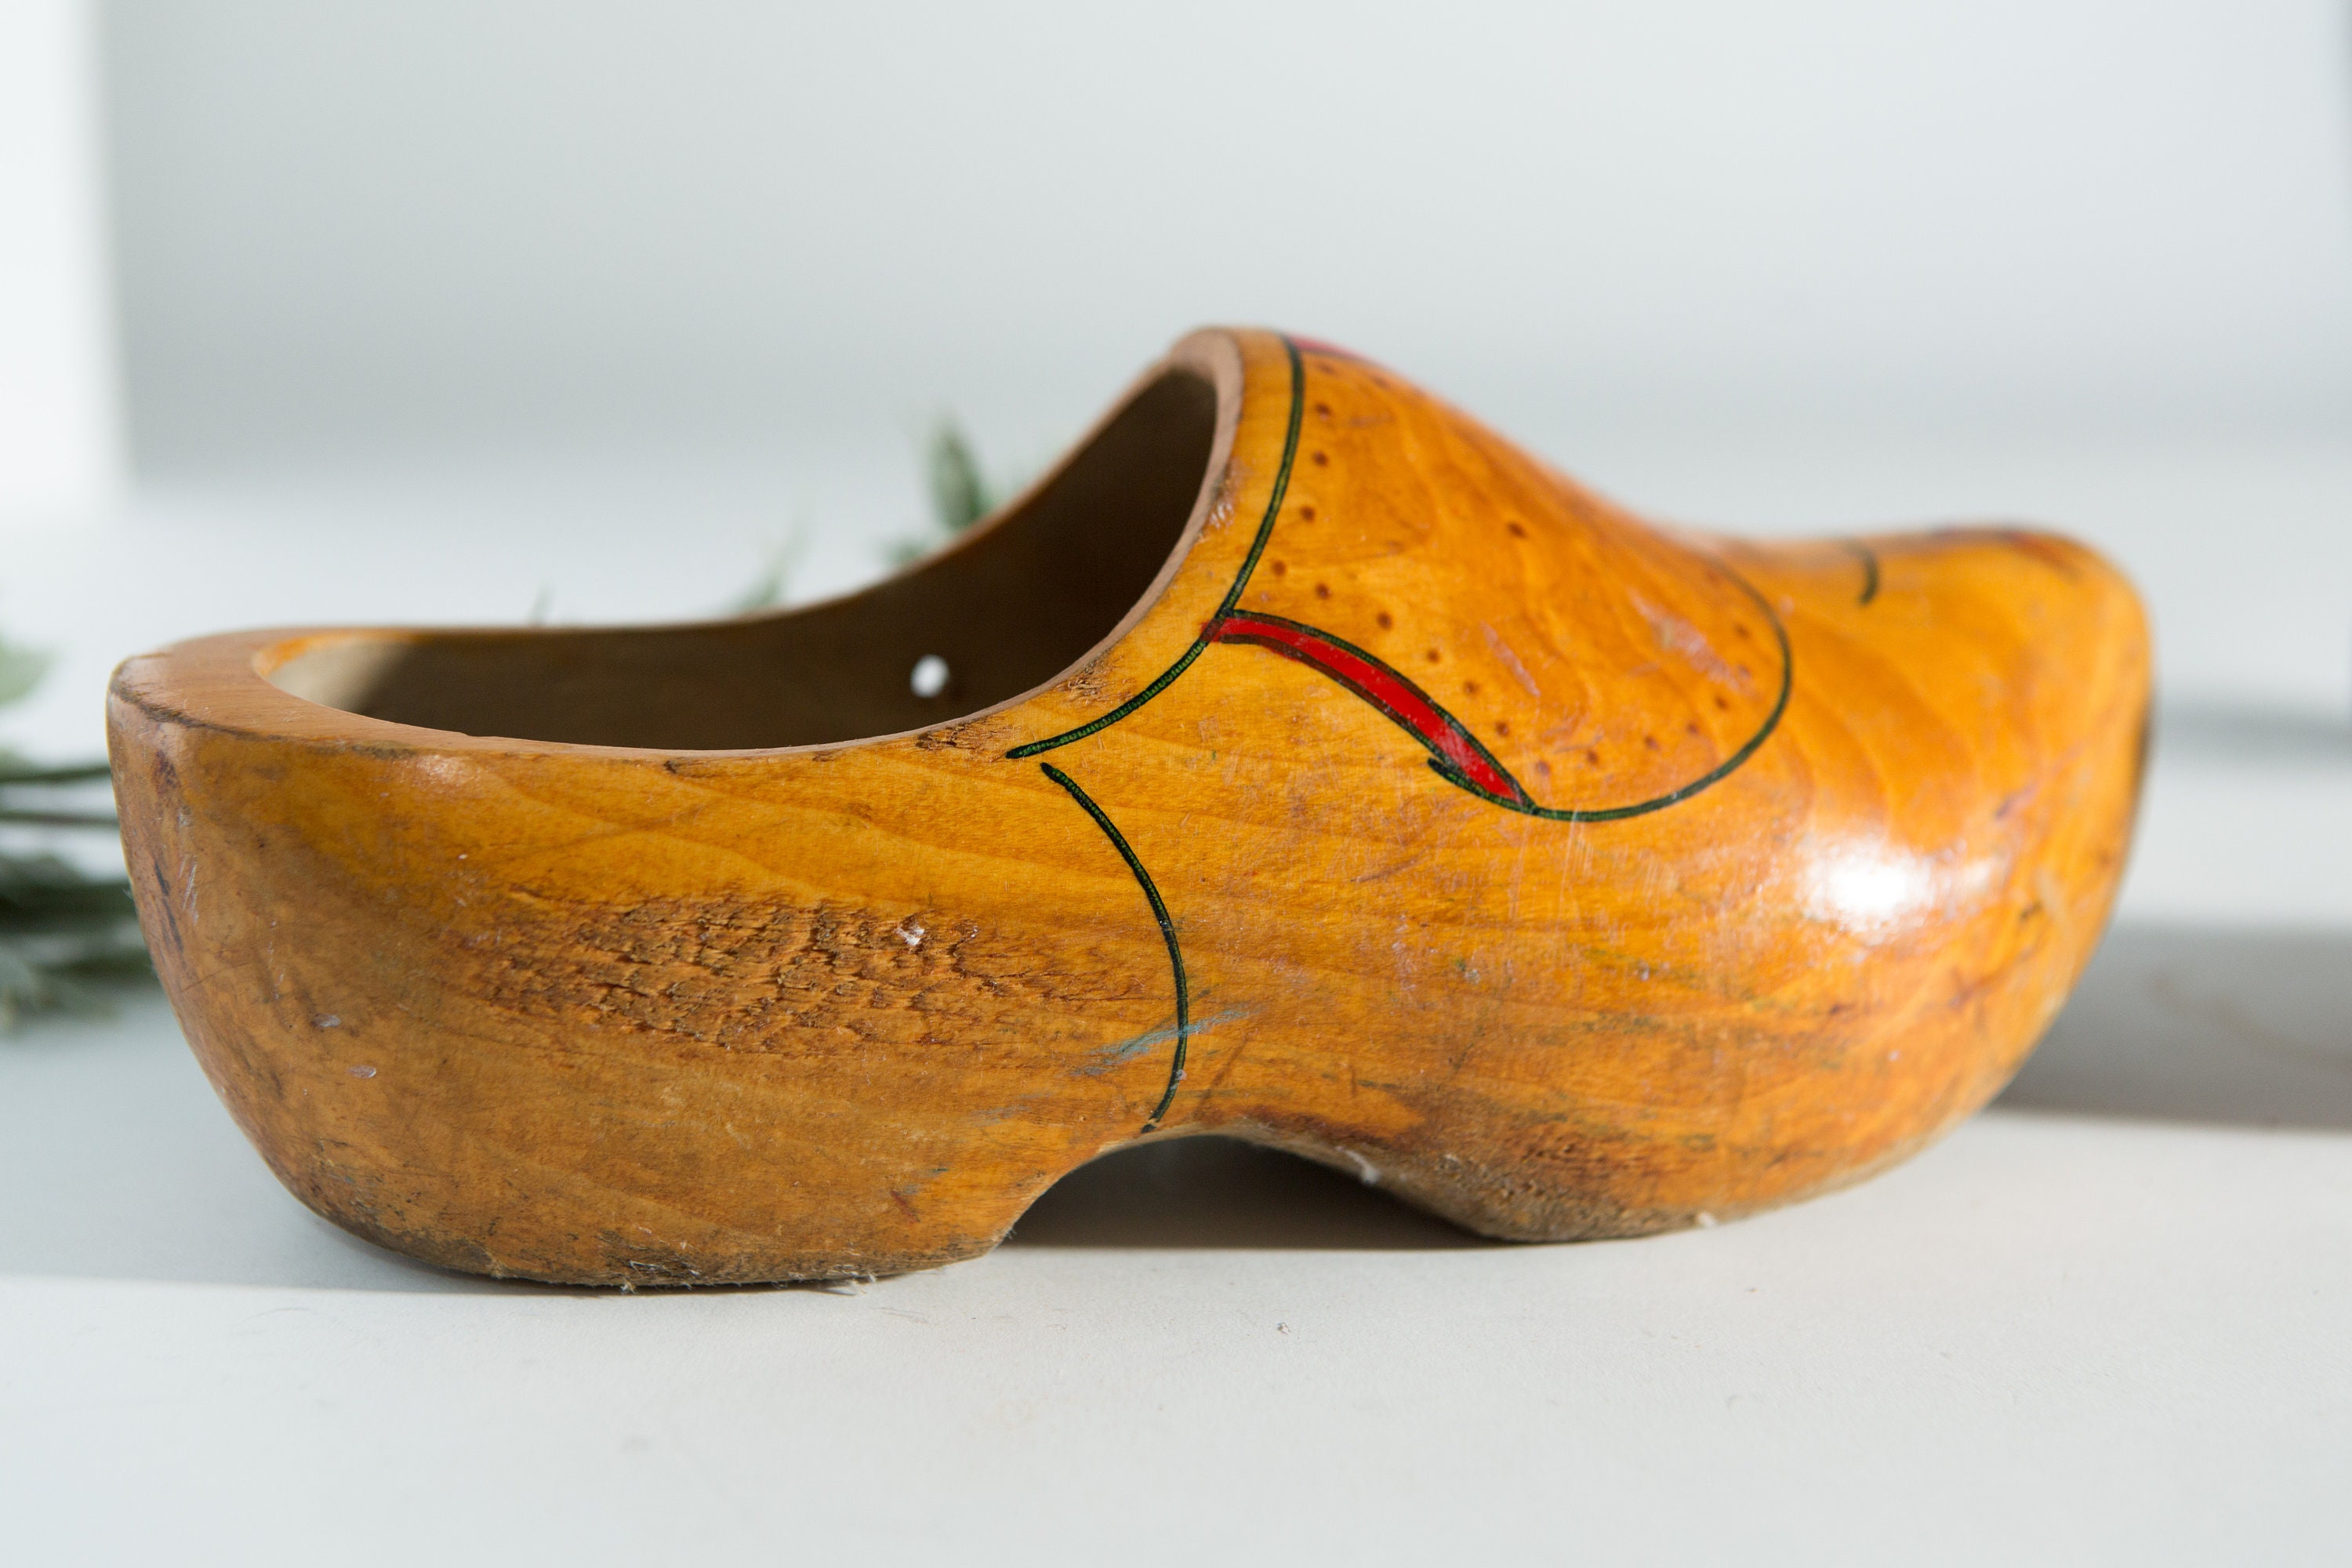 Vintage Wood Shoes - Dutch Wooden Clogs - Wood Plant Display - Wooden ...